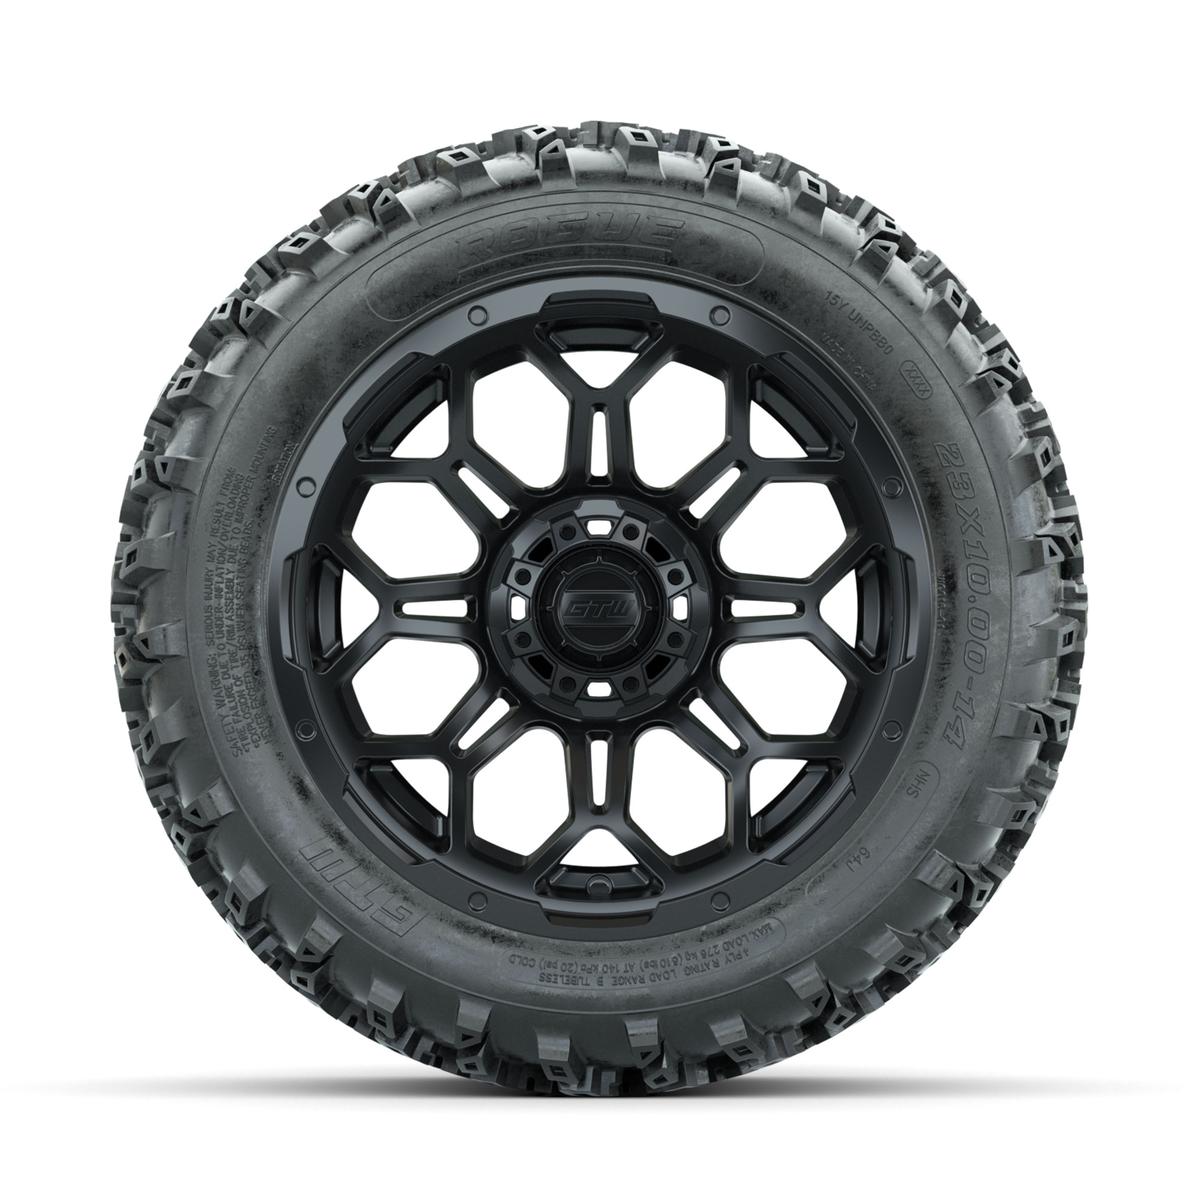 GTW Bravo Matte Black 14 in Wheels with 23x10.00-14 Rogue All Terrain Tires – Full Set